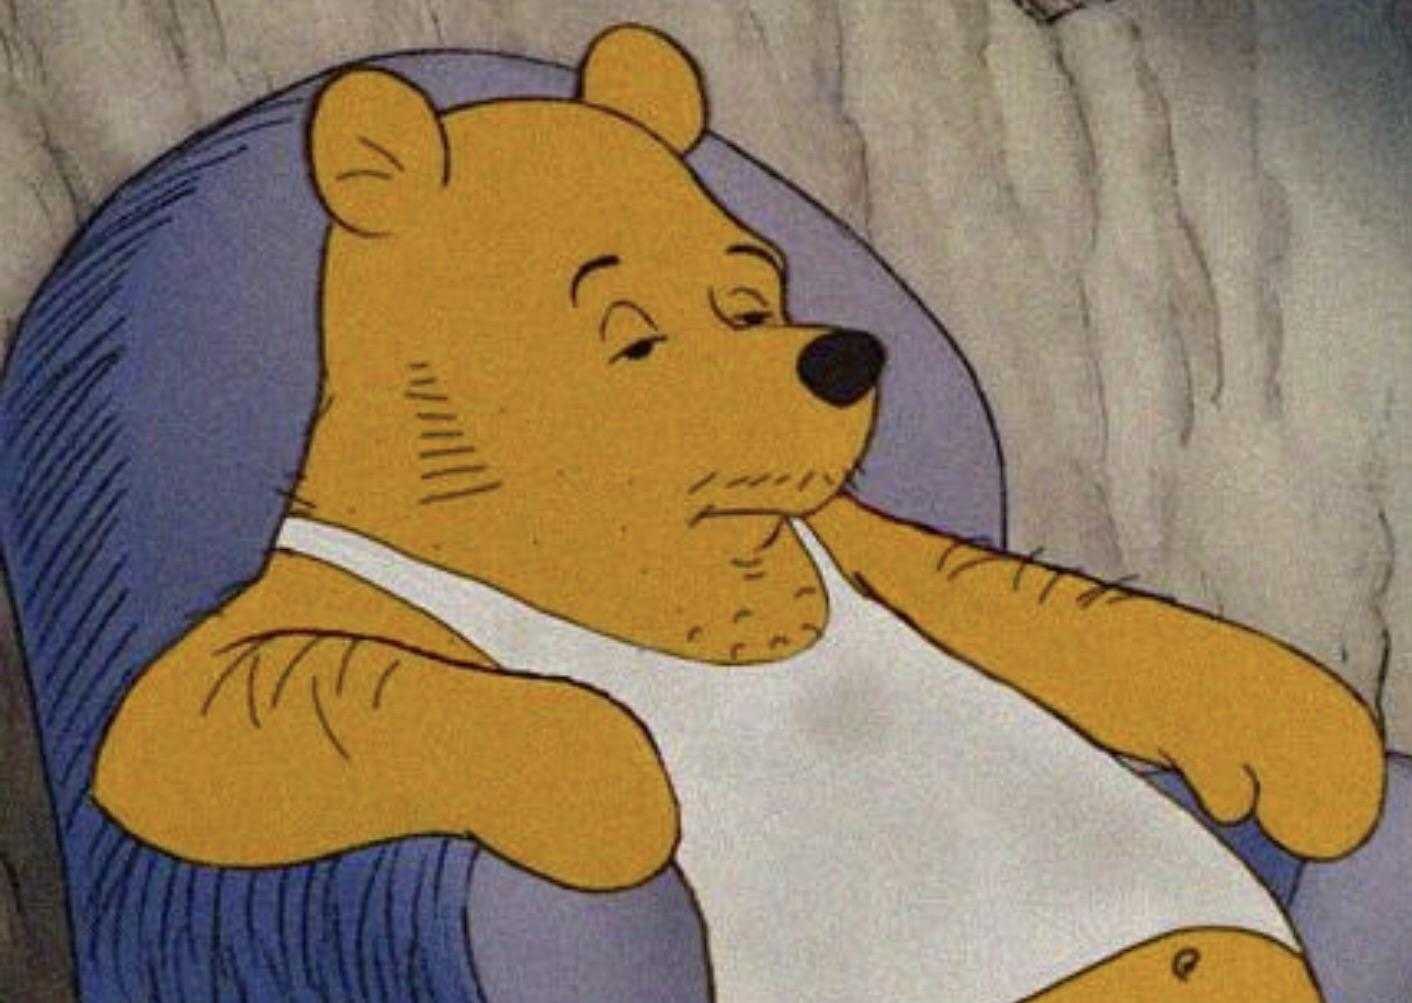 A Deeper Look at the Seven Deadly Sins Through Winnie the Pooh 1